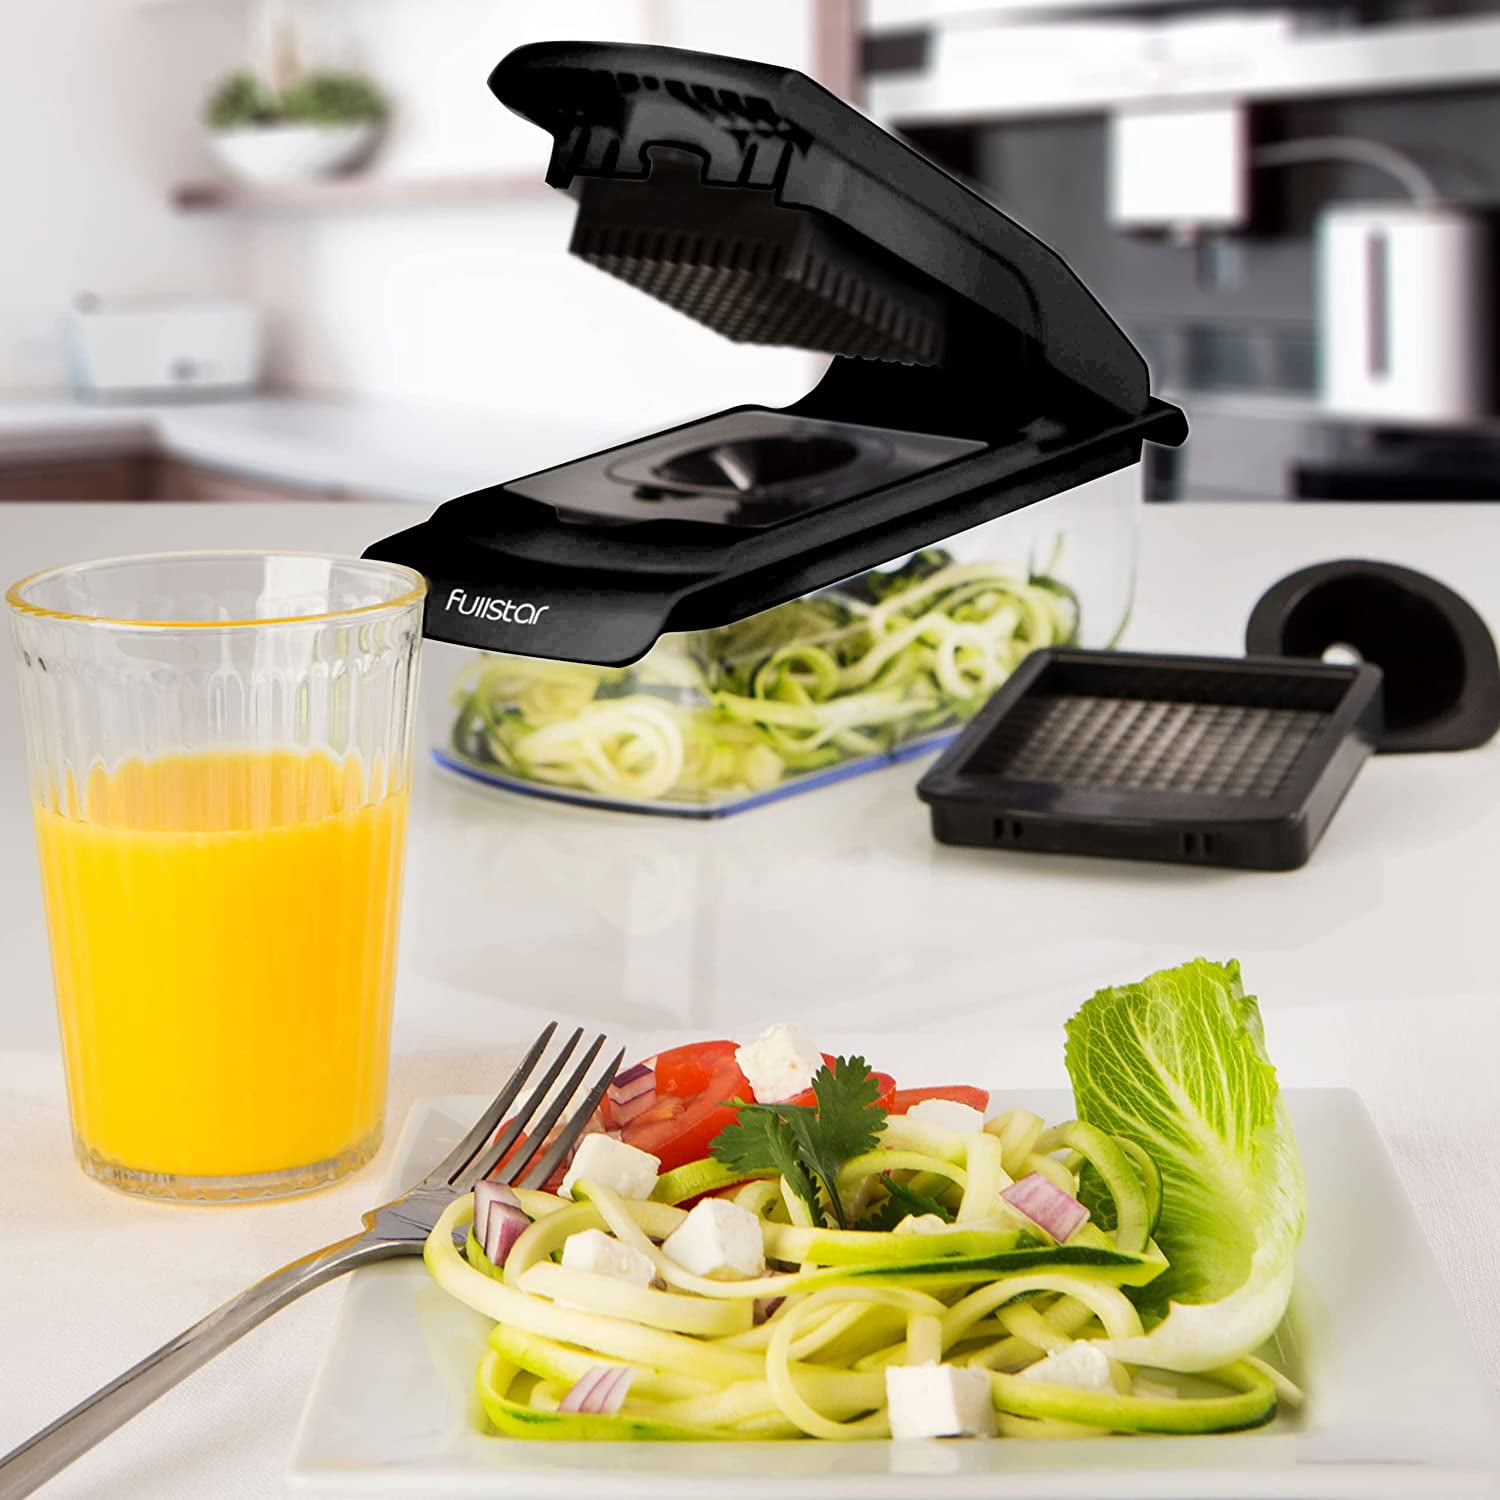 Fullstar 4 Blade Vegetable Chopper And Slicer With Container Pro Food Black Dicer  Cutter For Onion And Easy Vegetable Side Dishes 0107 From Puppyhome, $24.67